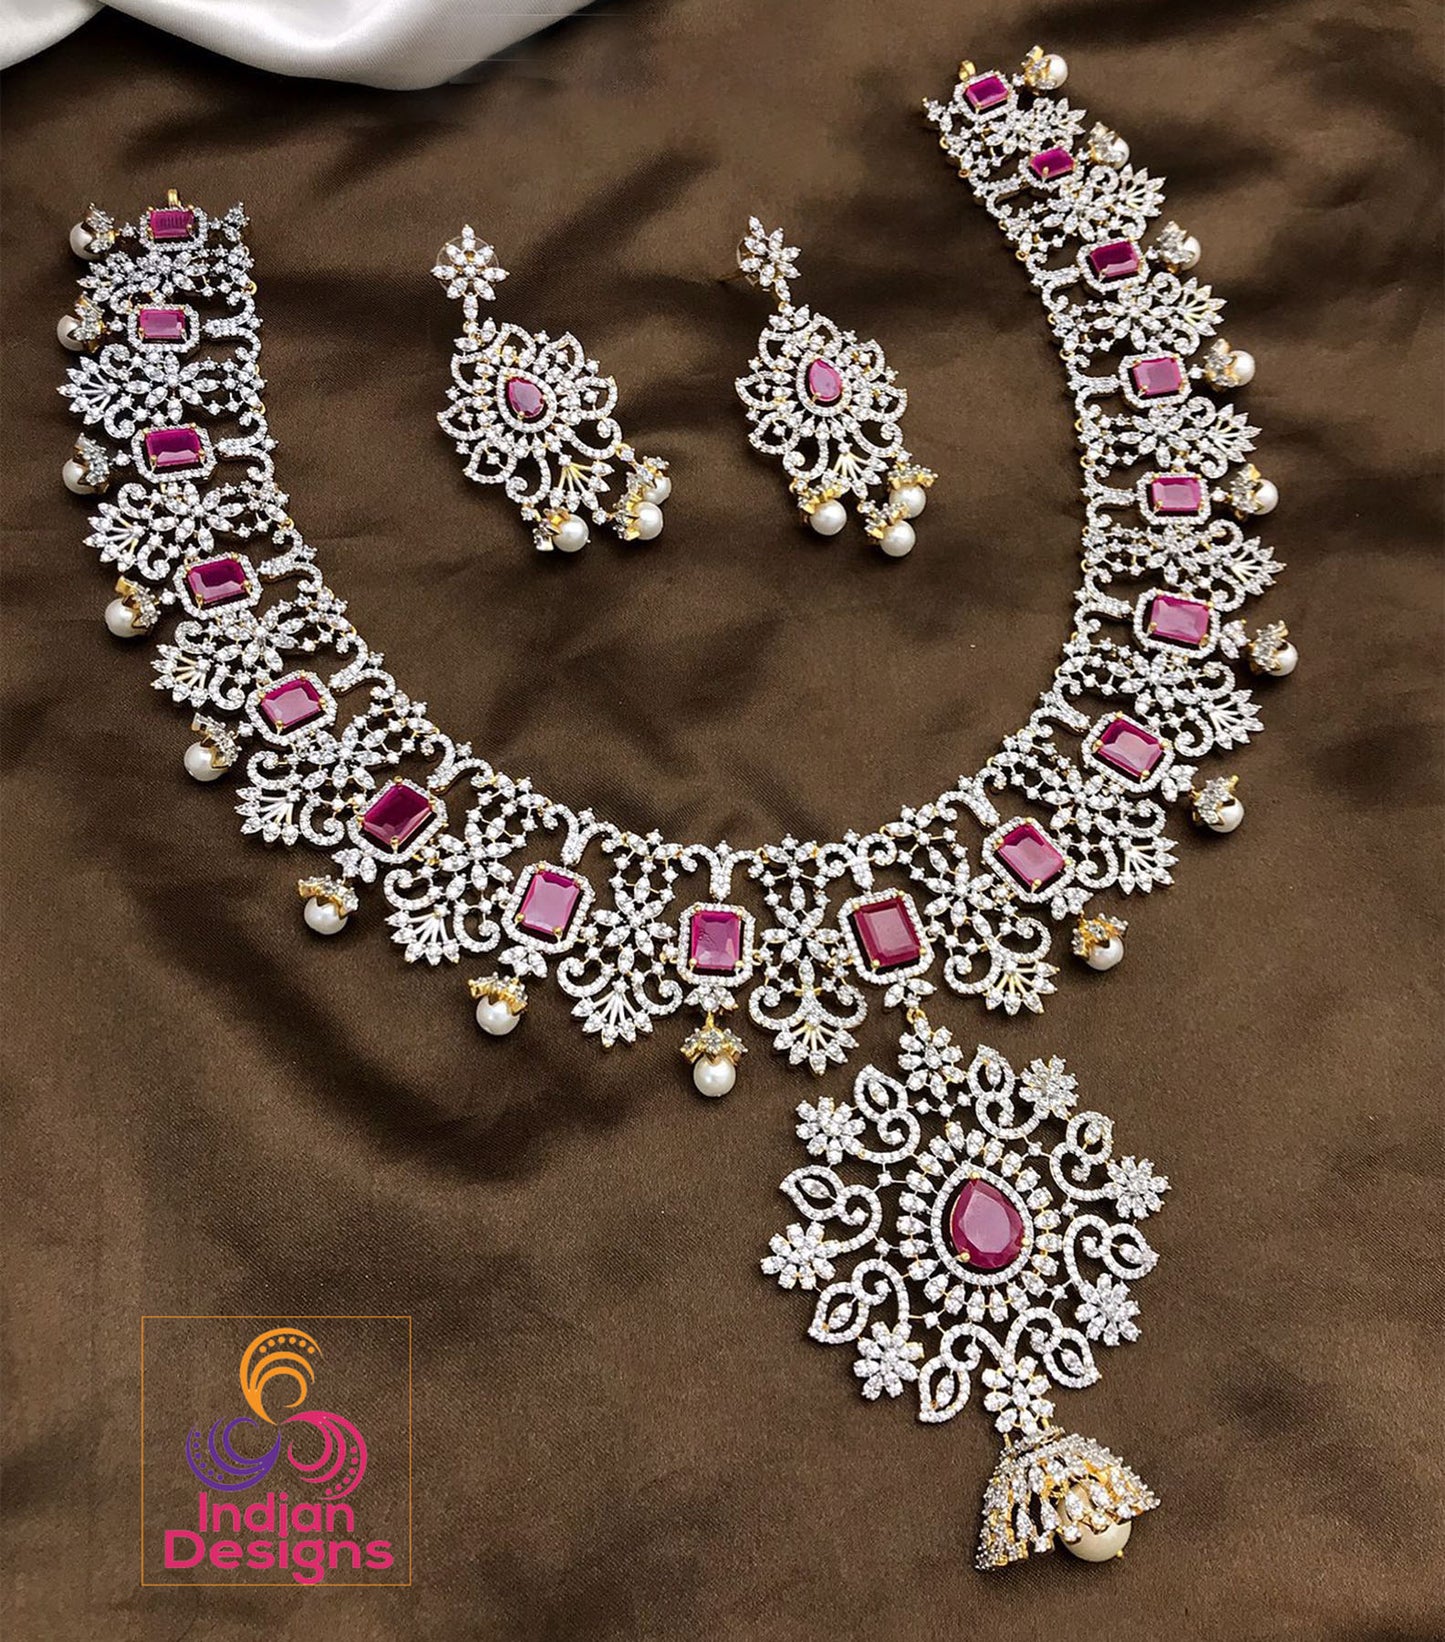 Large Grand American Diamond Jewelry Necklace studded with emerald cut Ruby stone and Pearl drops